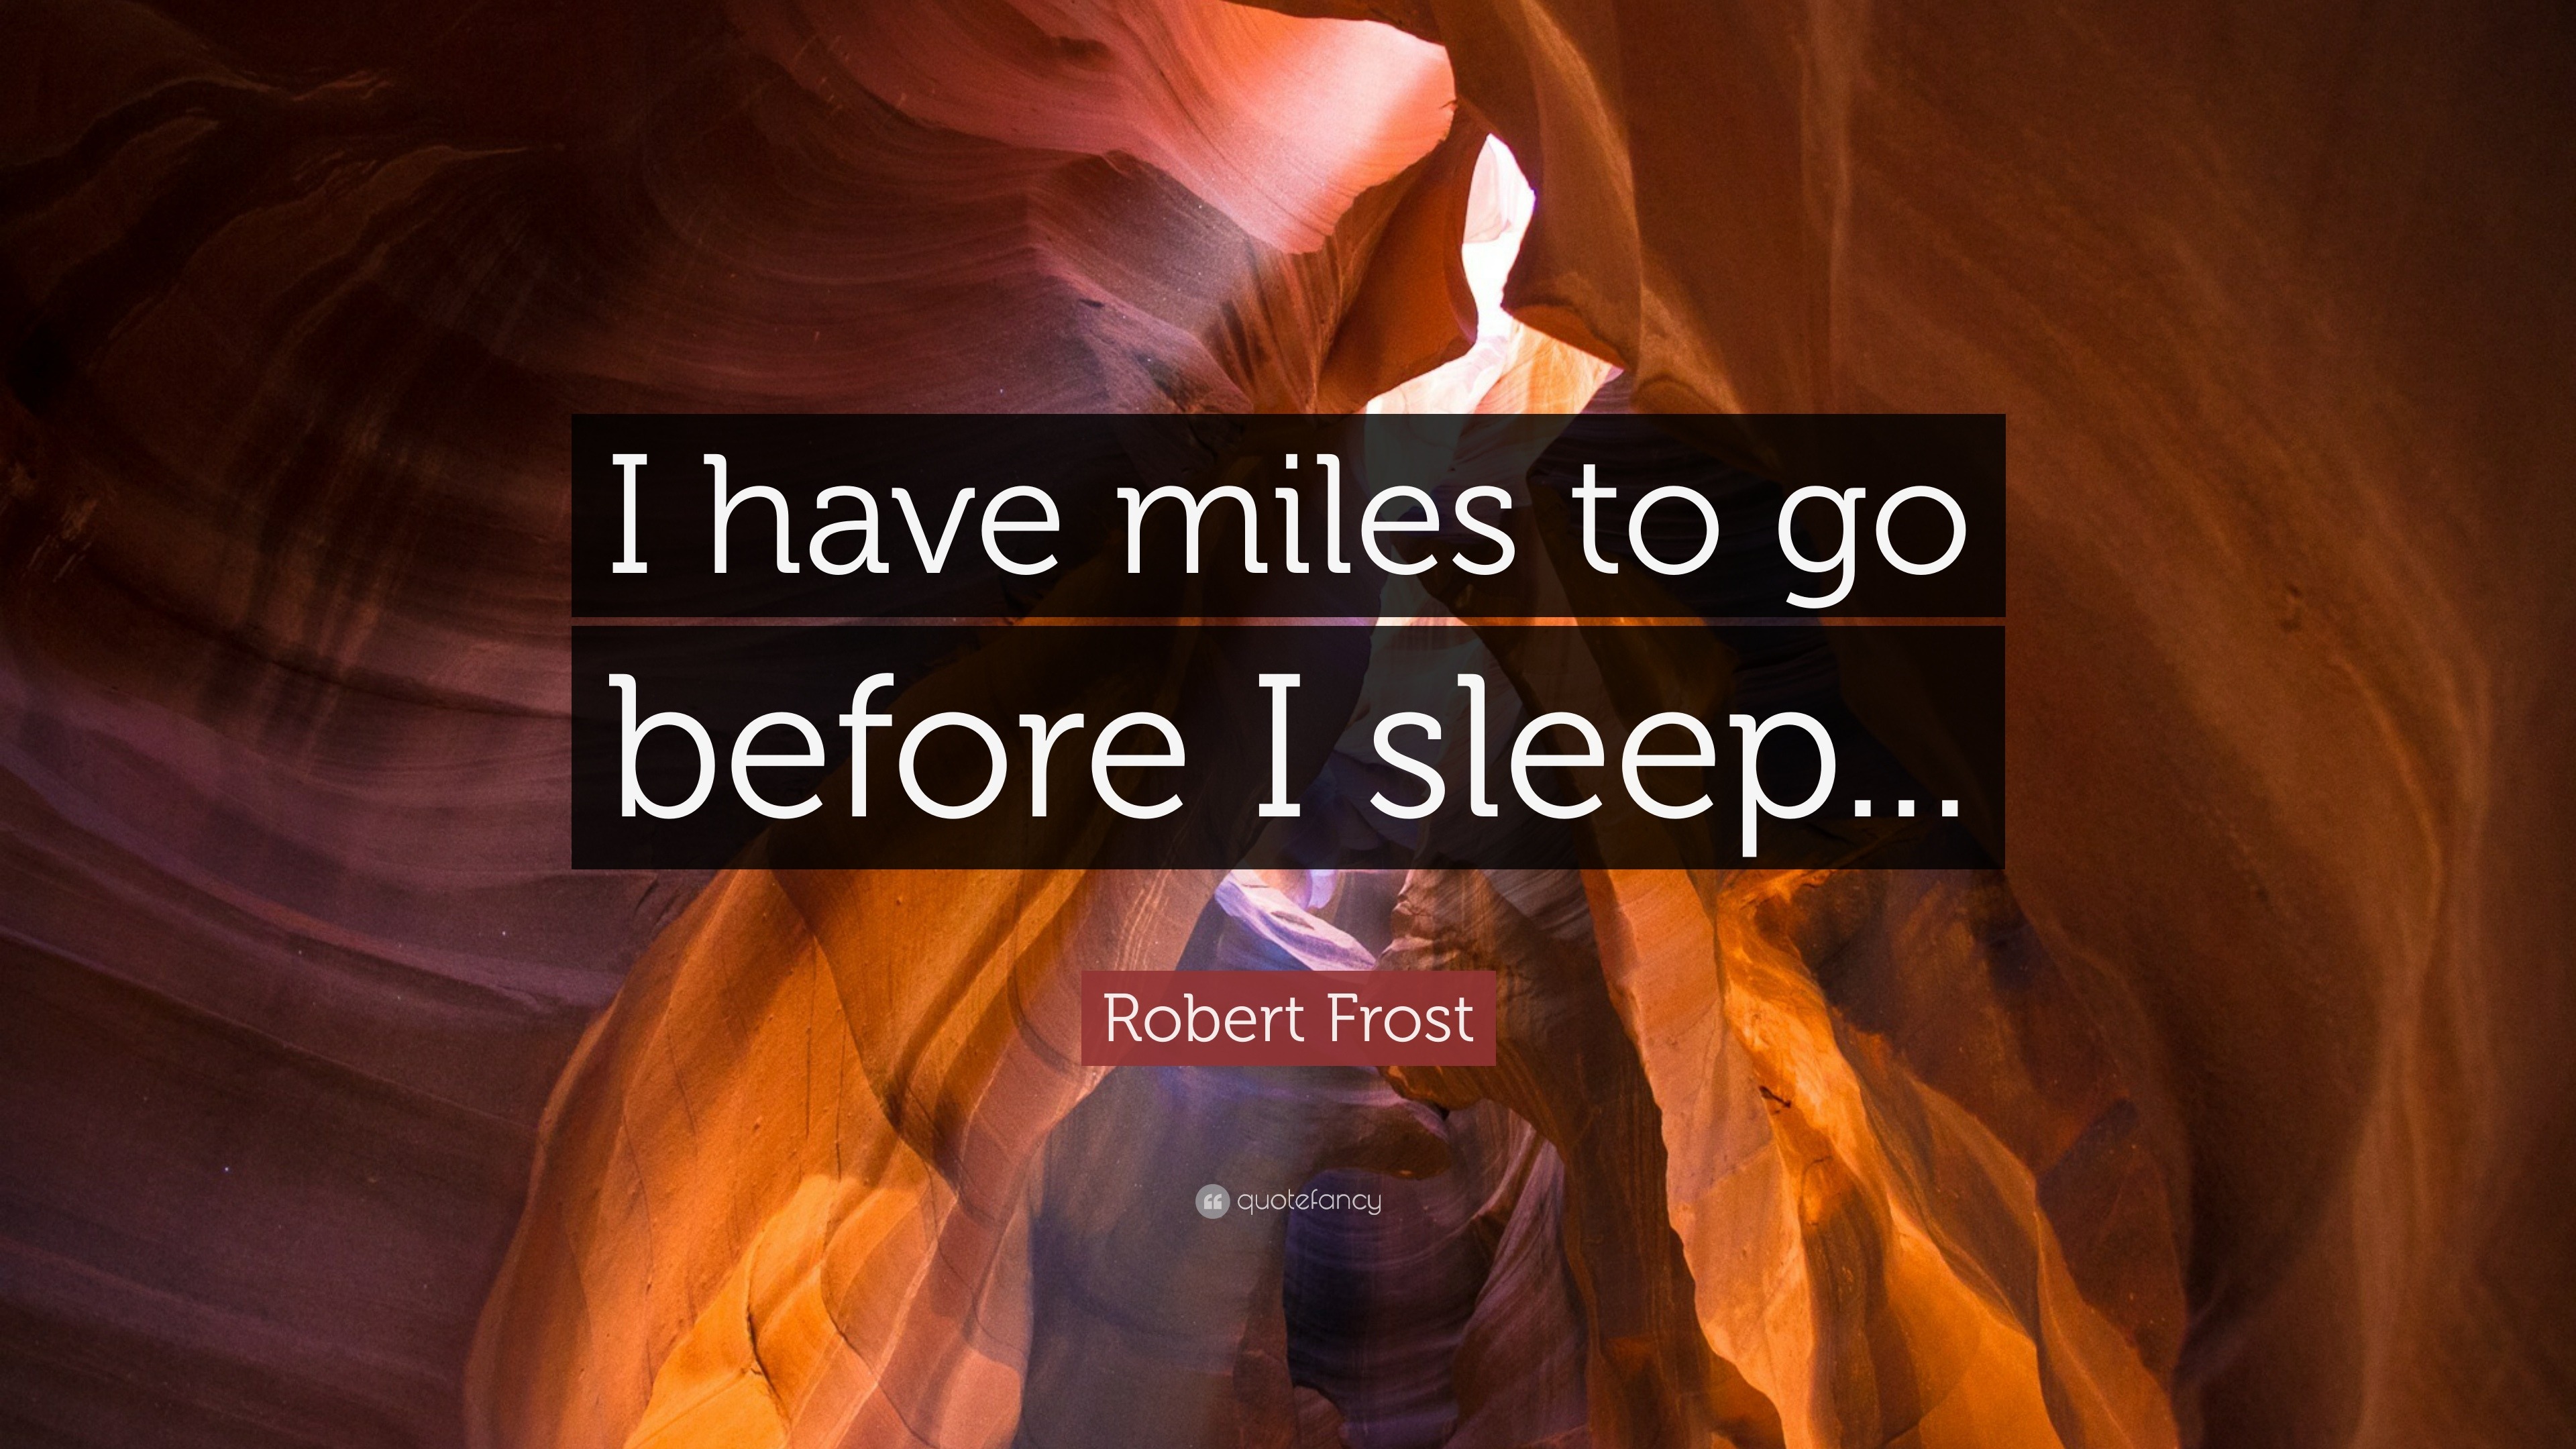 1. "Miles To Go Before I Sleep" quote tattoo design - wide 1